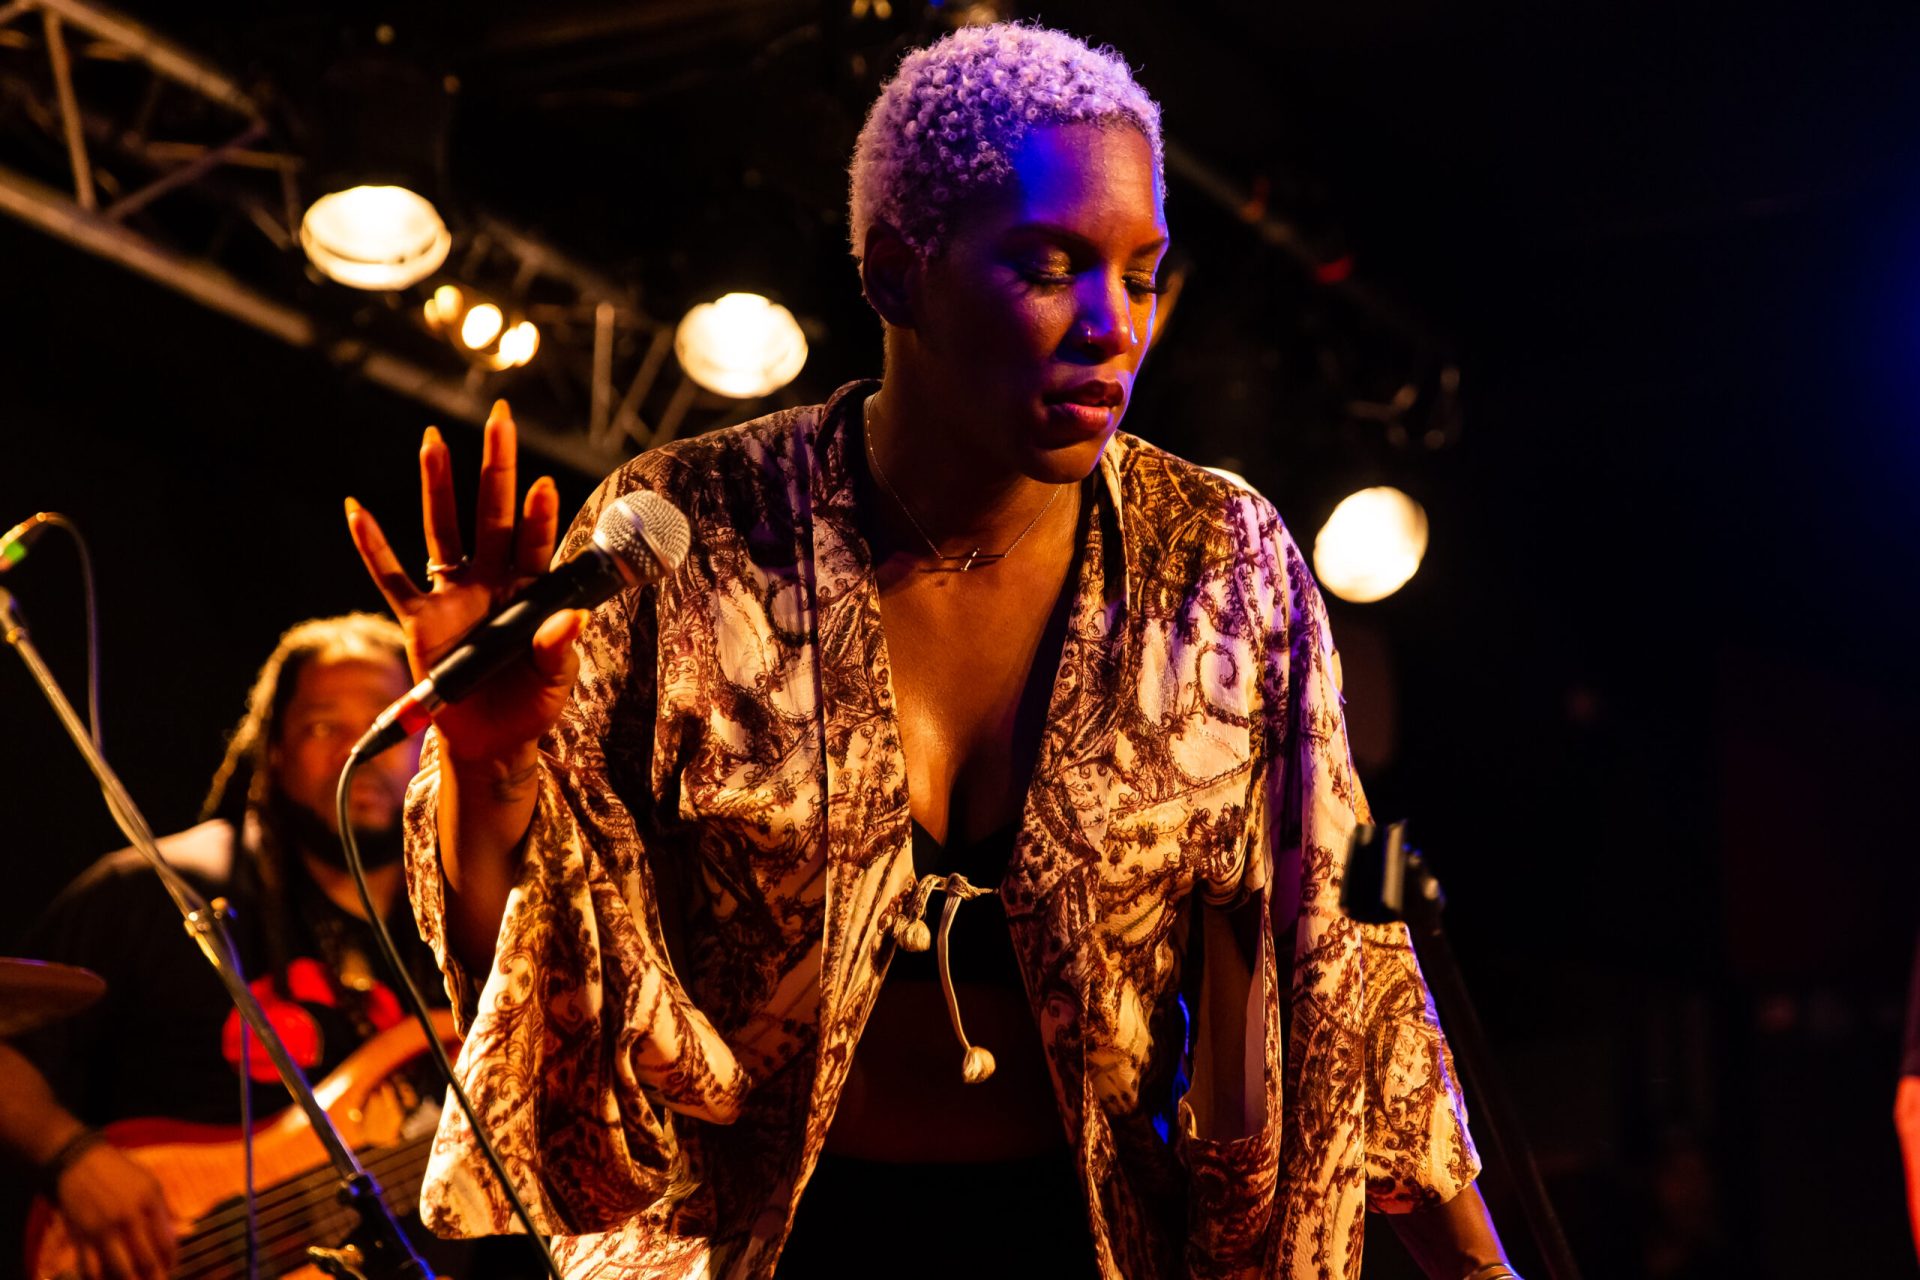 Liv Warfield presents a third concert at The Paper Club on Saturday 24 at 15.00 hours